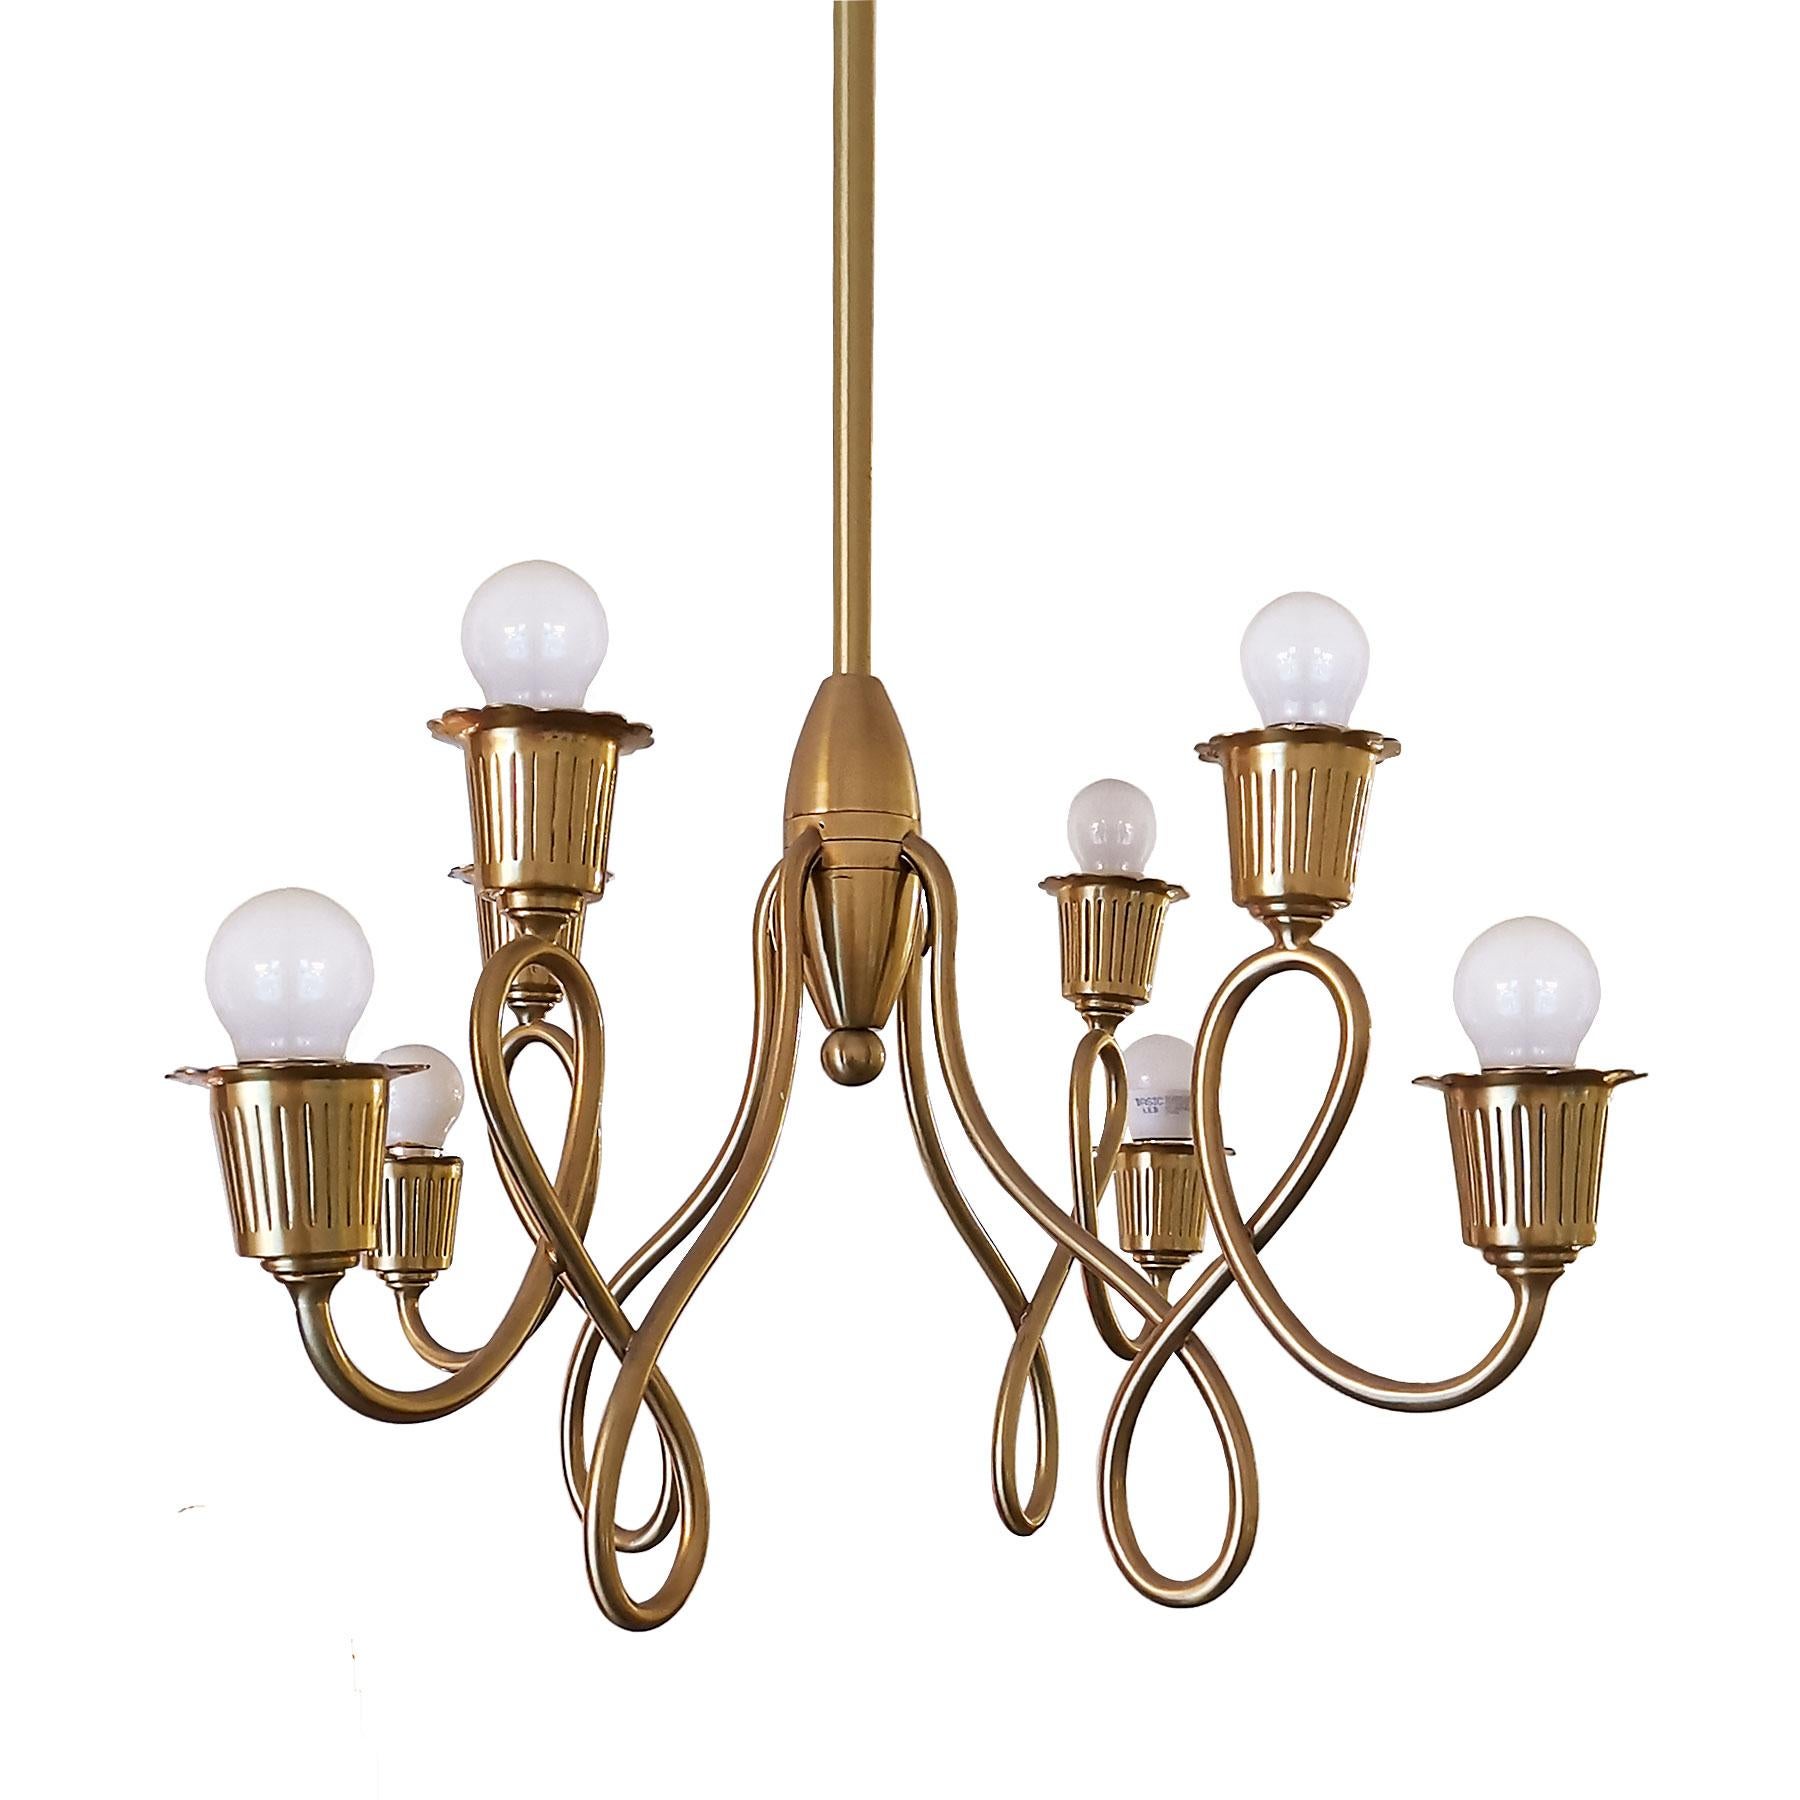 Chandelier in brass with 4 rounded branches and 8-light.

Italy, circa 1940

Measures: Branches height 45 cm.